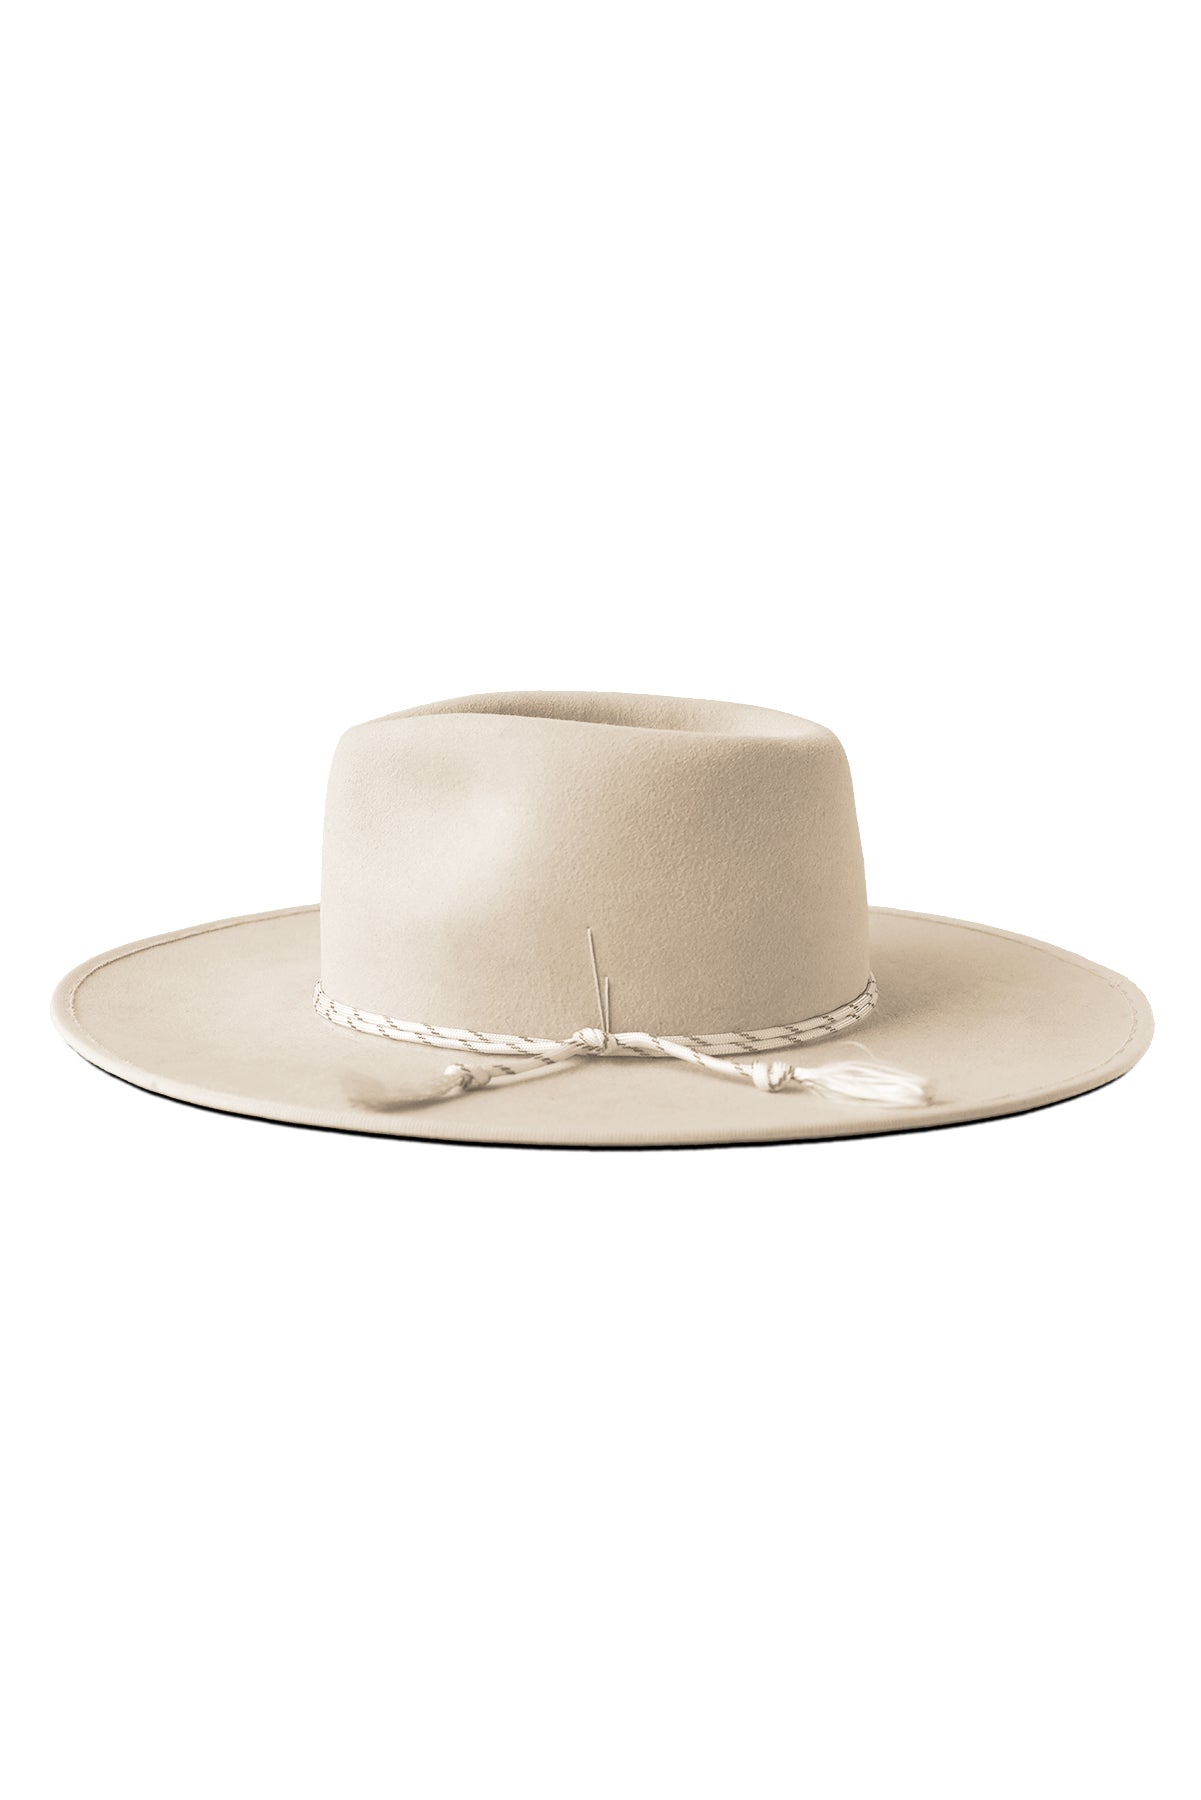 Unisex beige fur felt fedora hat with a wide brim and paracord, handcrafted by SoonNoon in Stockholm